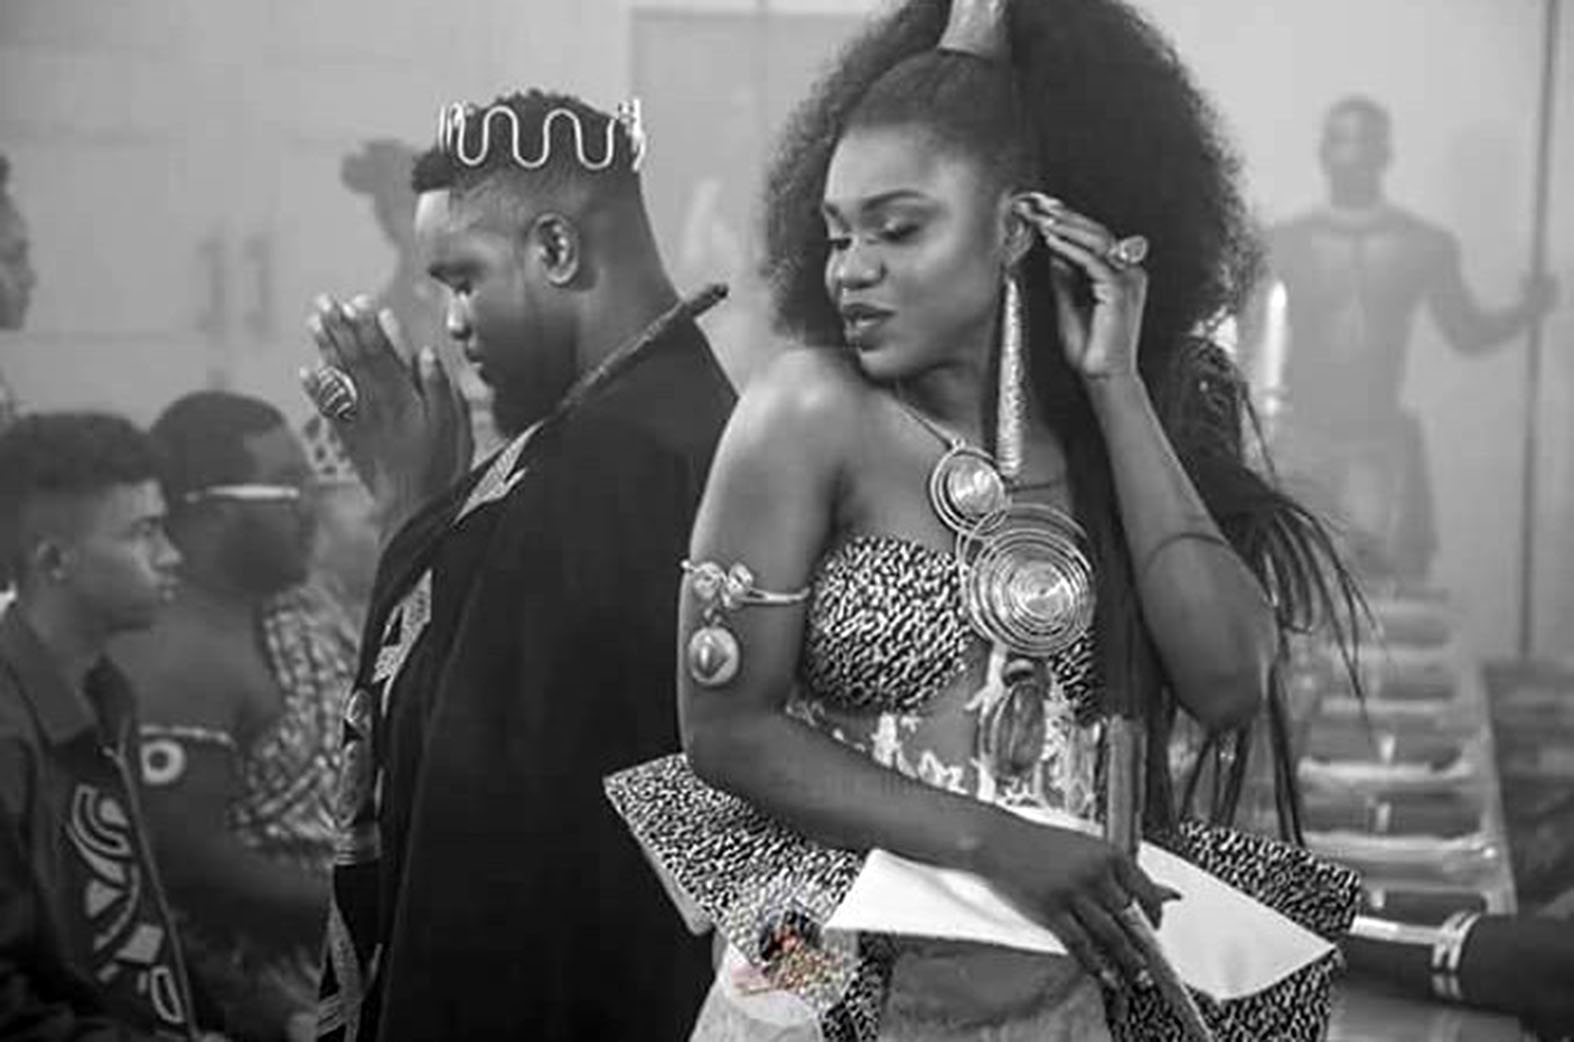 Becca will release her new video feat. Sarkodie tomorrow